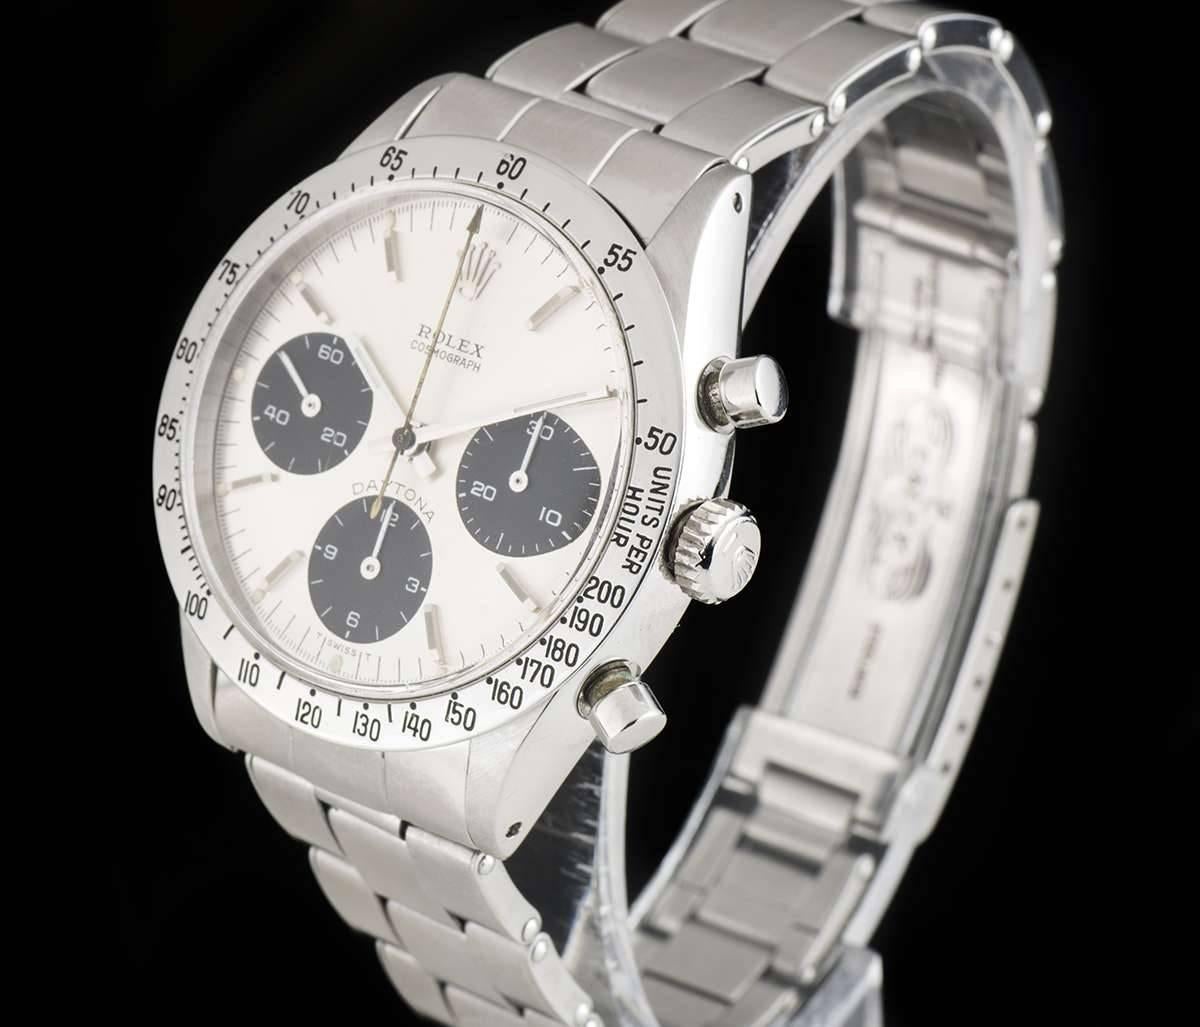 A Stainless Steel Cosmograph Daytona Gents Wristwatch, silvered dial with black sub-dials and applied hour markers, 30 minute recorder at 3 0'clock, 12 hour recorder at 6 0'clock, small seconds at 9 0'clock, a fixed stainless steel bezel with an